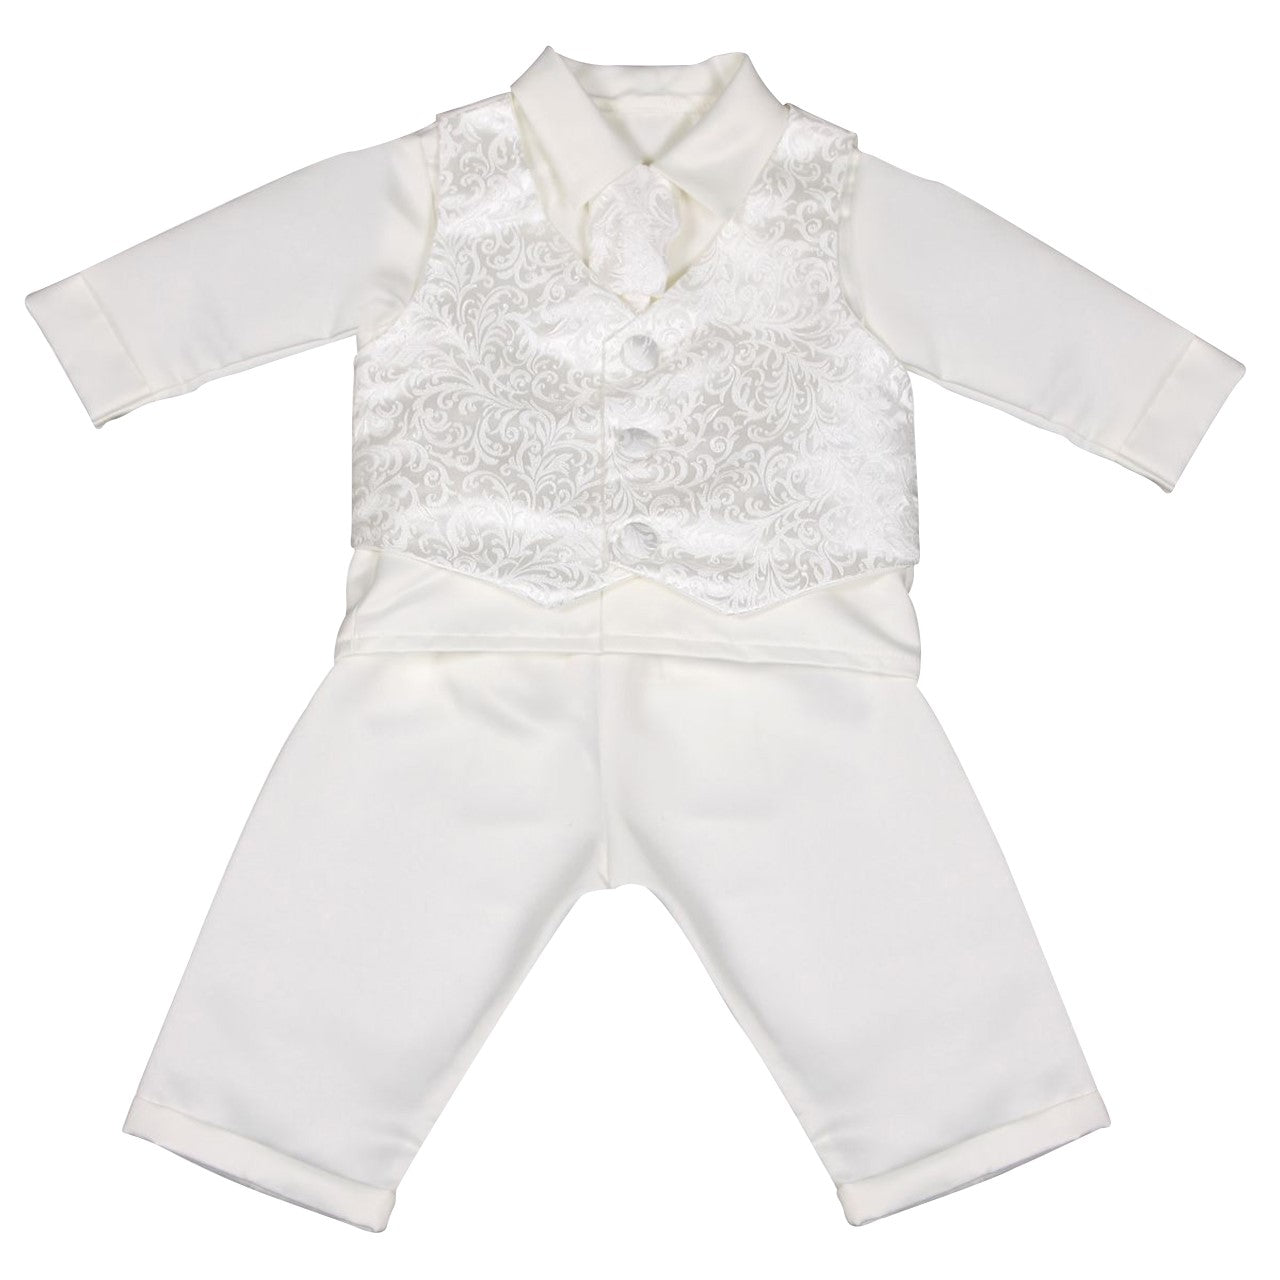 Boys Vivaki Paisley Christening Suit in White or Ivory